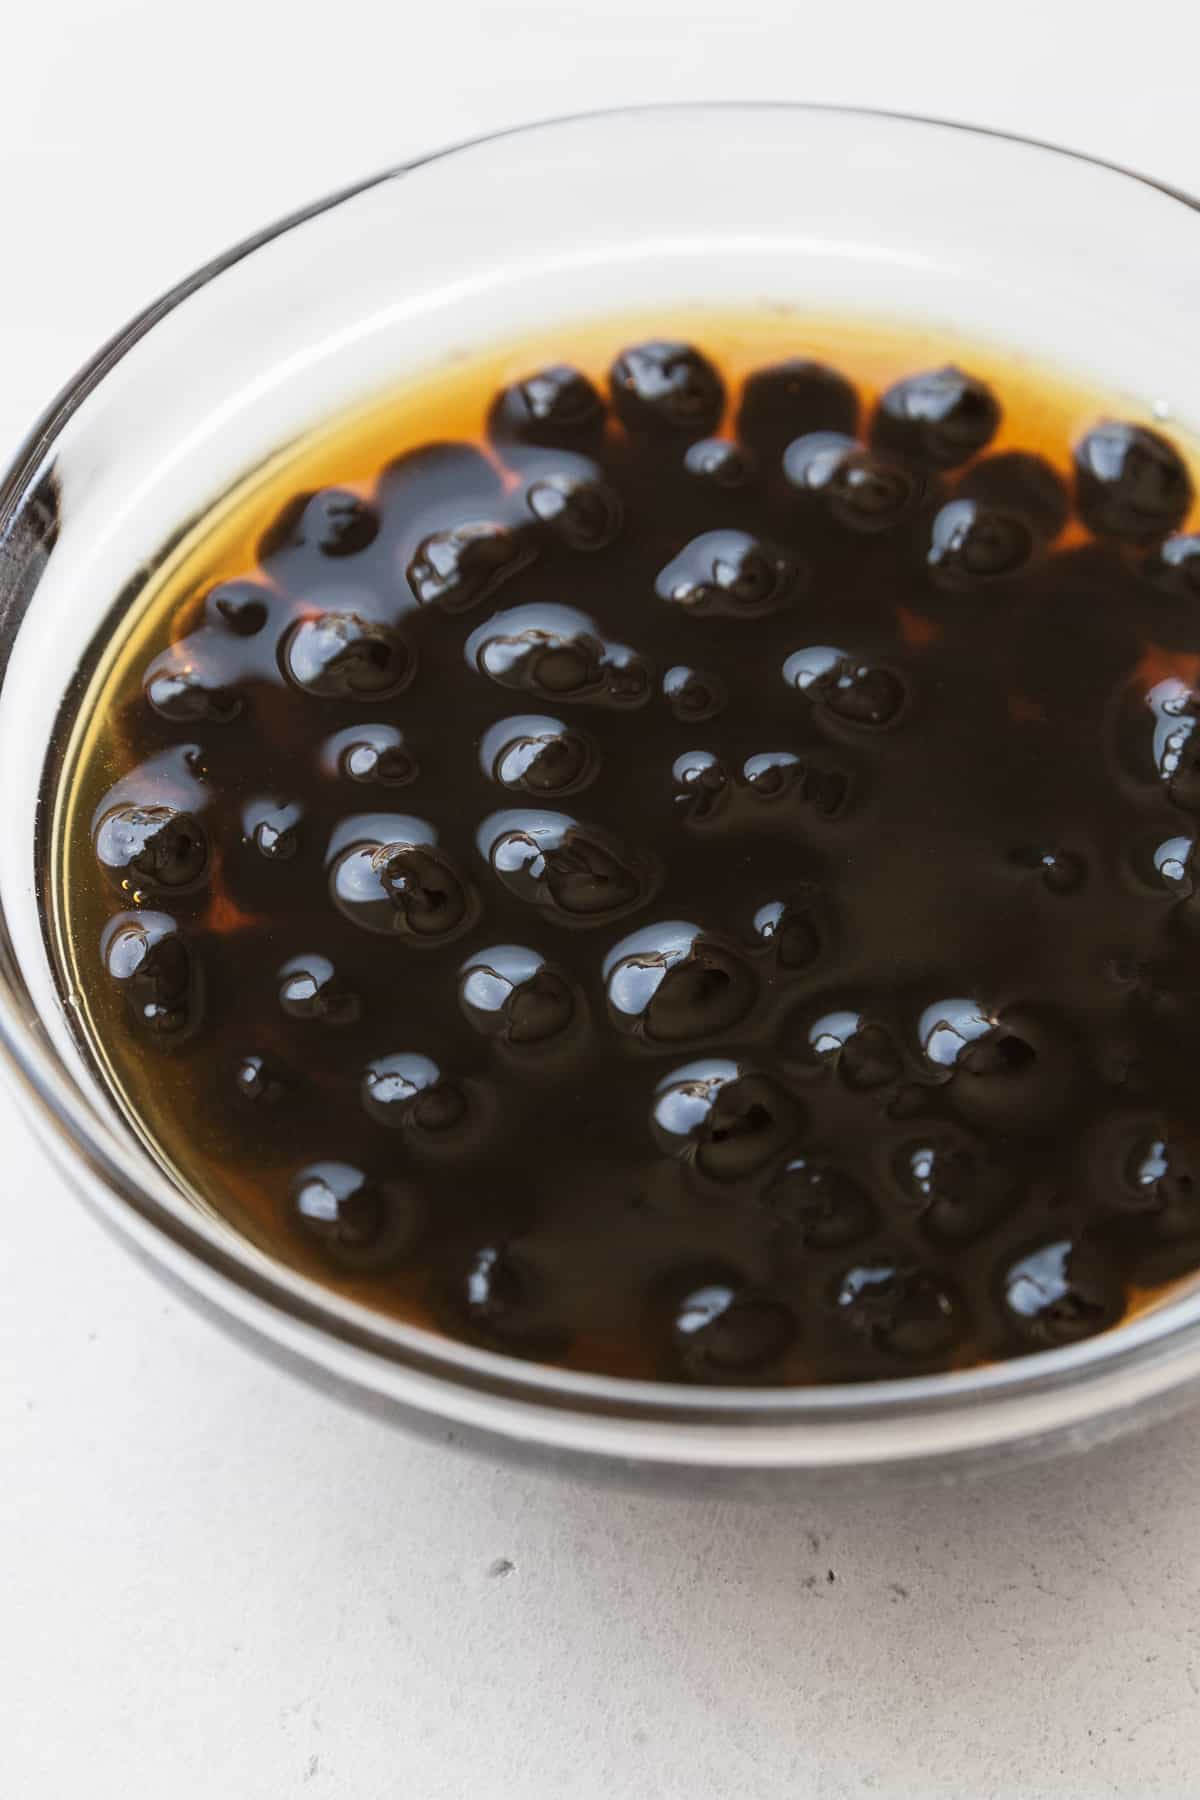 Soaking boba pearls in a small bowl of brown sugar simple syrup. 